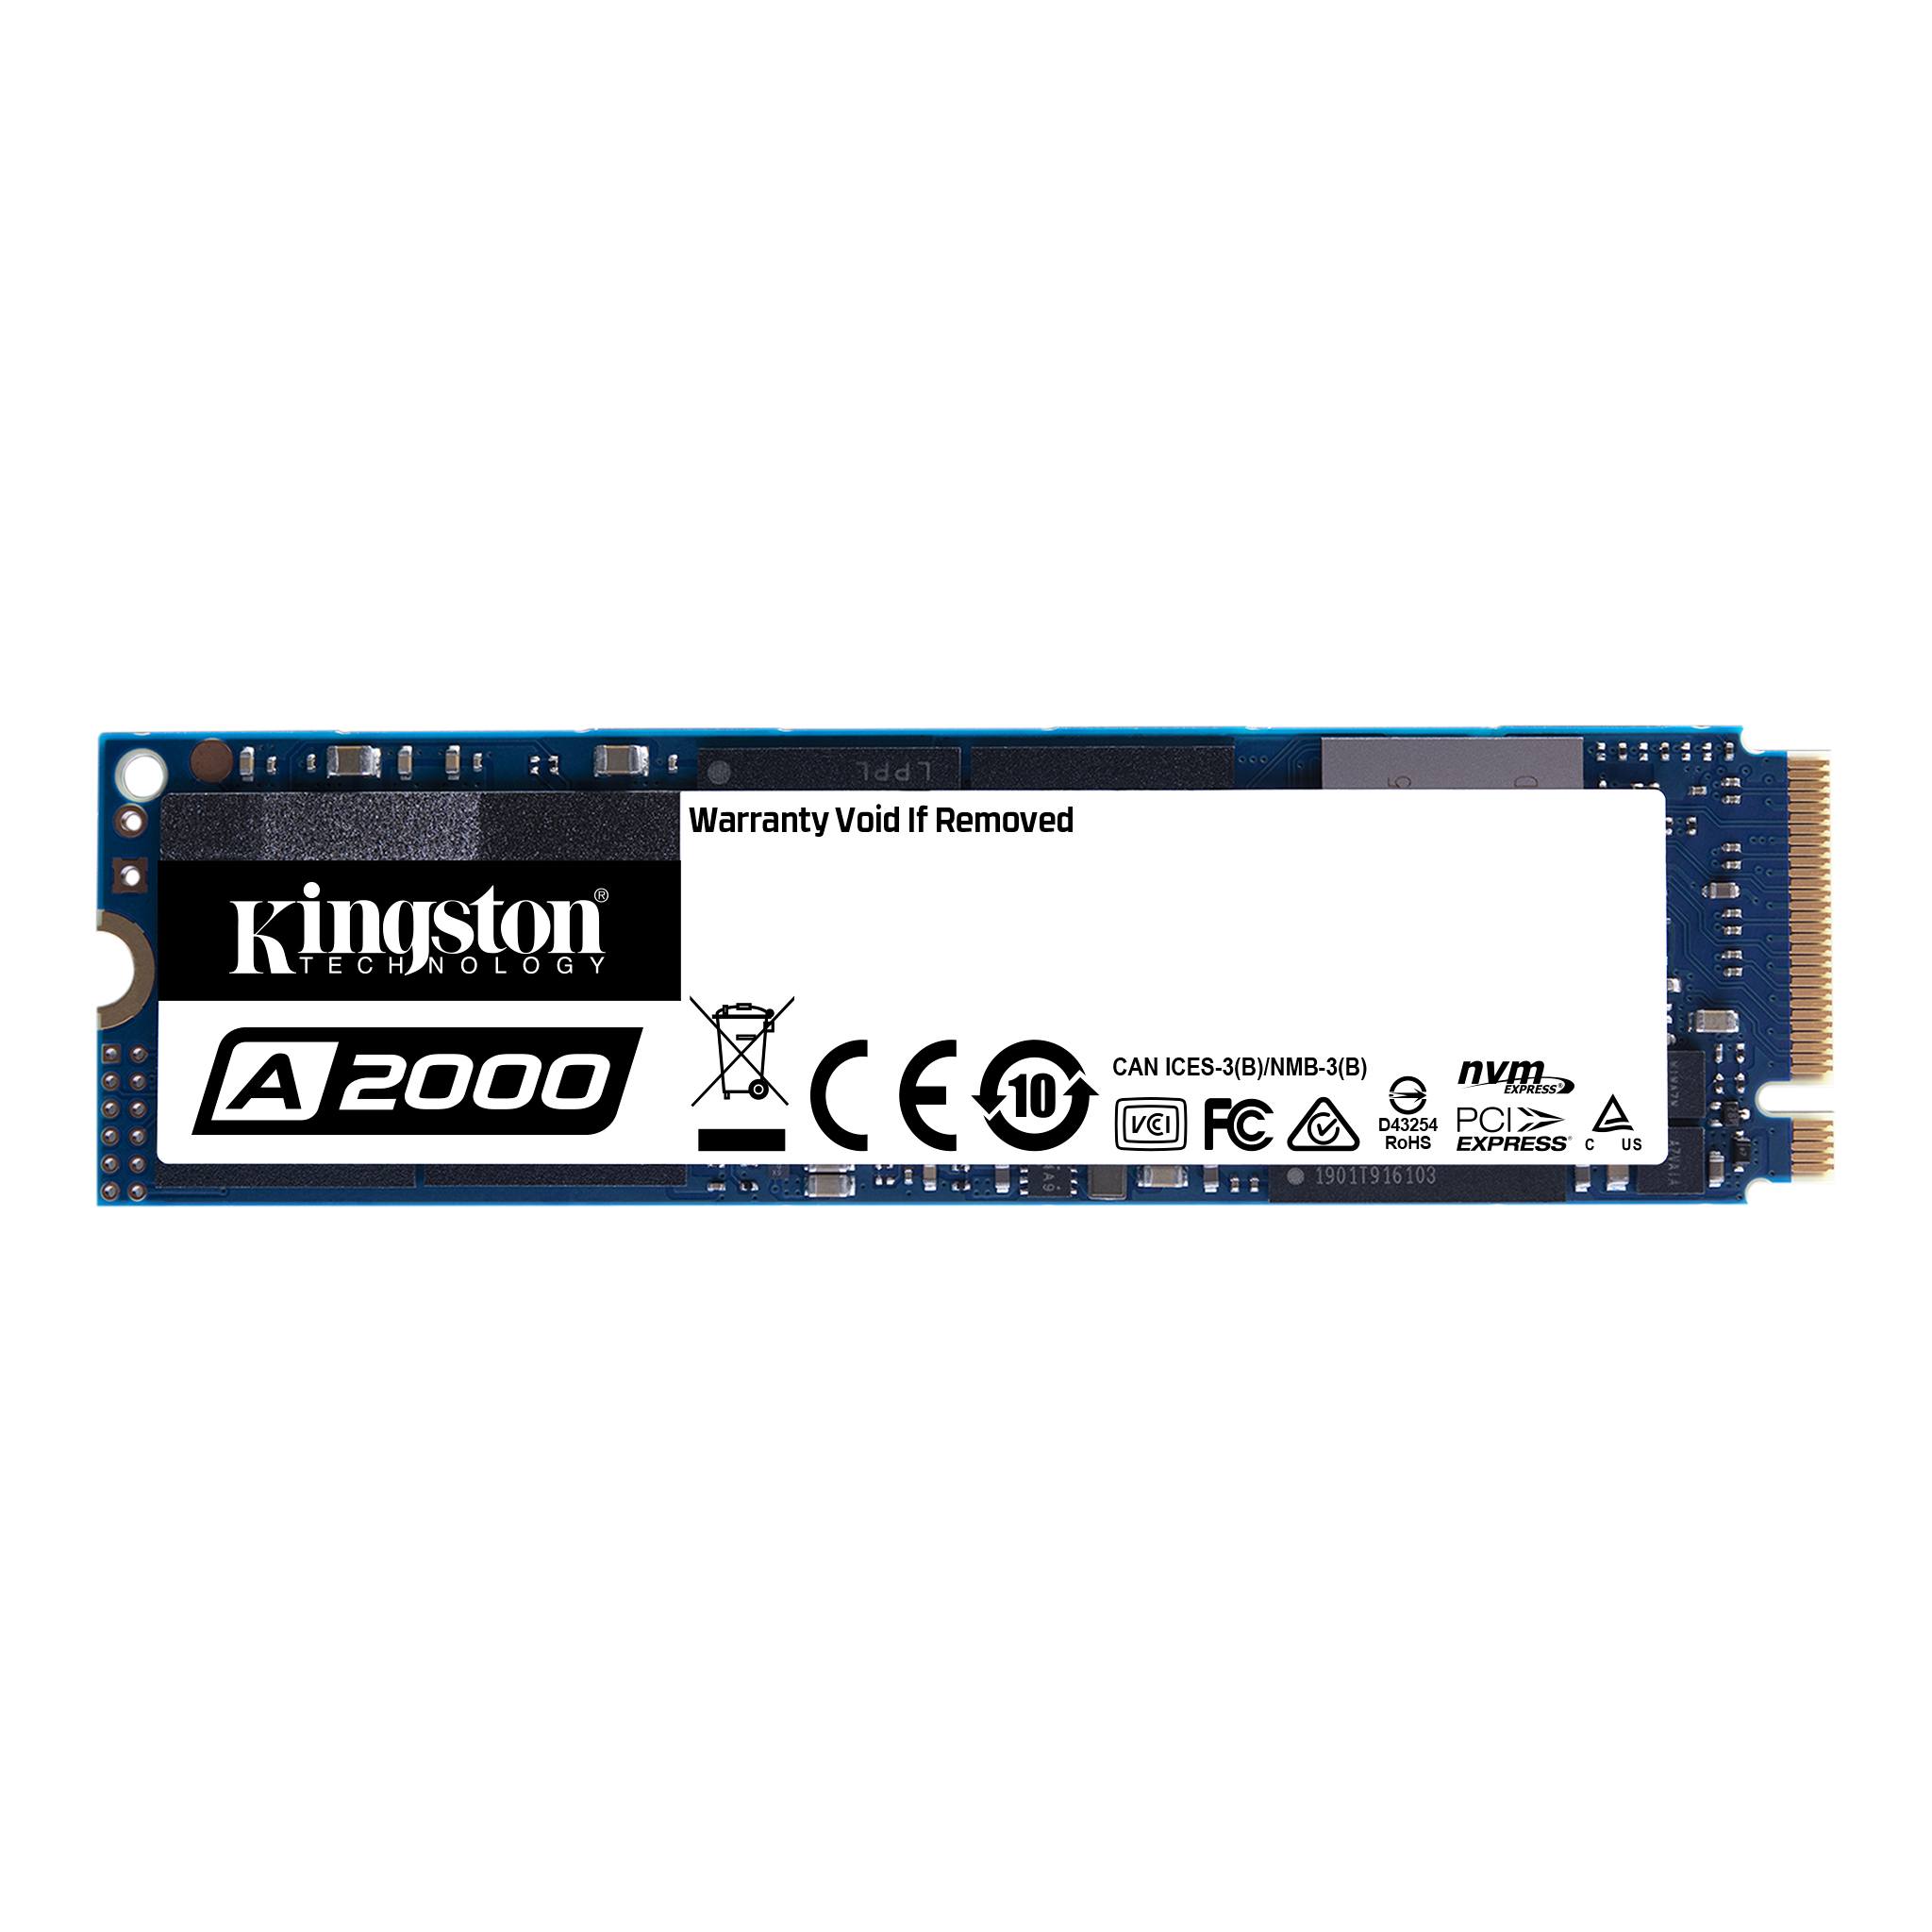 Kingston A2000 M.2 NVMe SSD Benchmarked - Tests